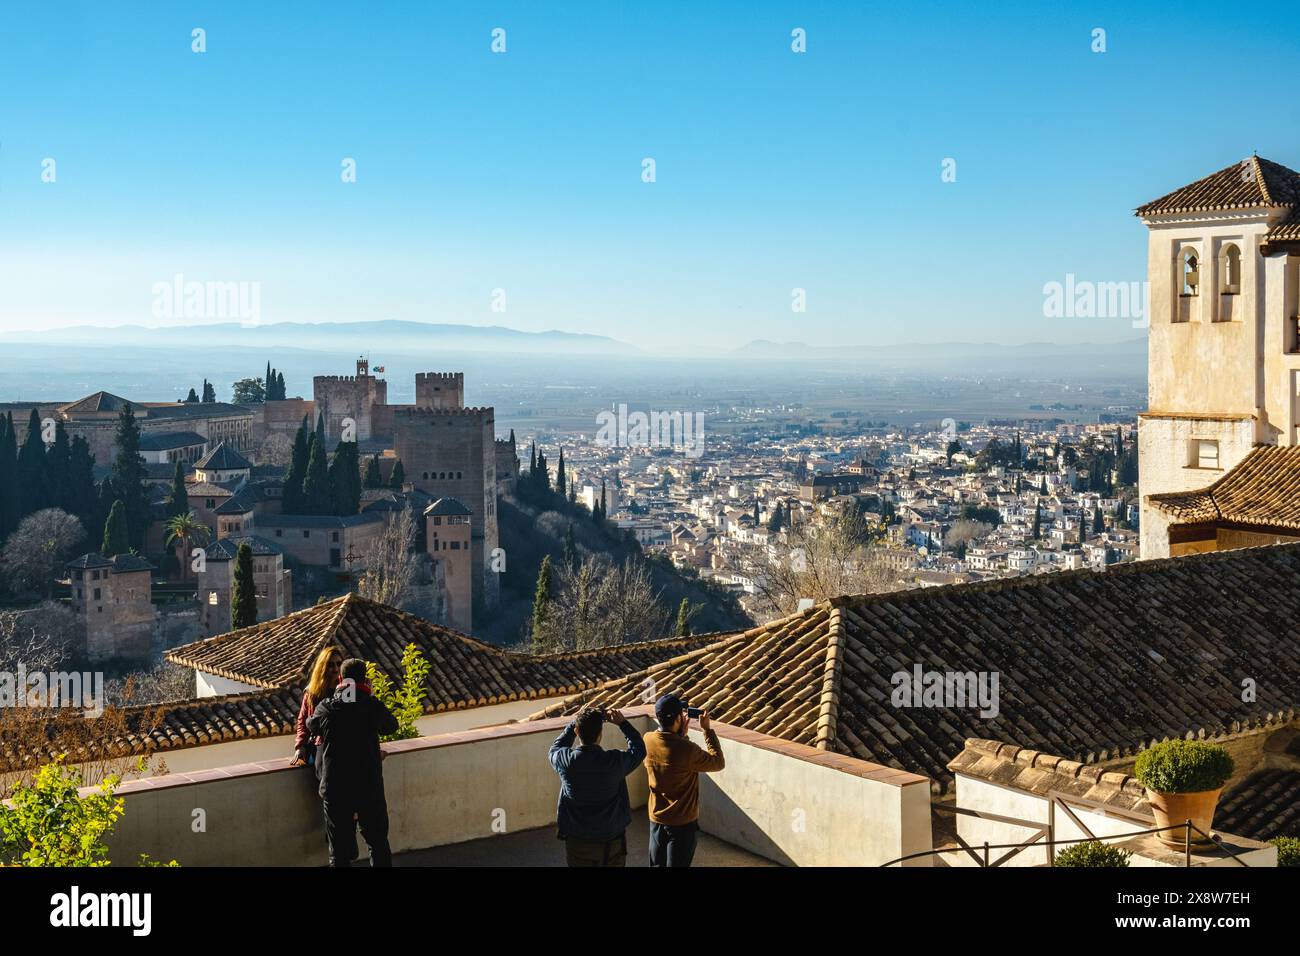 Generalife Gardens in Granada, Andalusia, Spain, part of the Alhambra Stock Photo